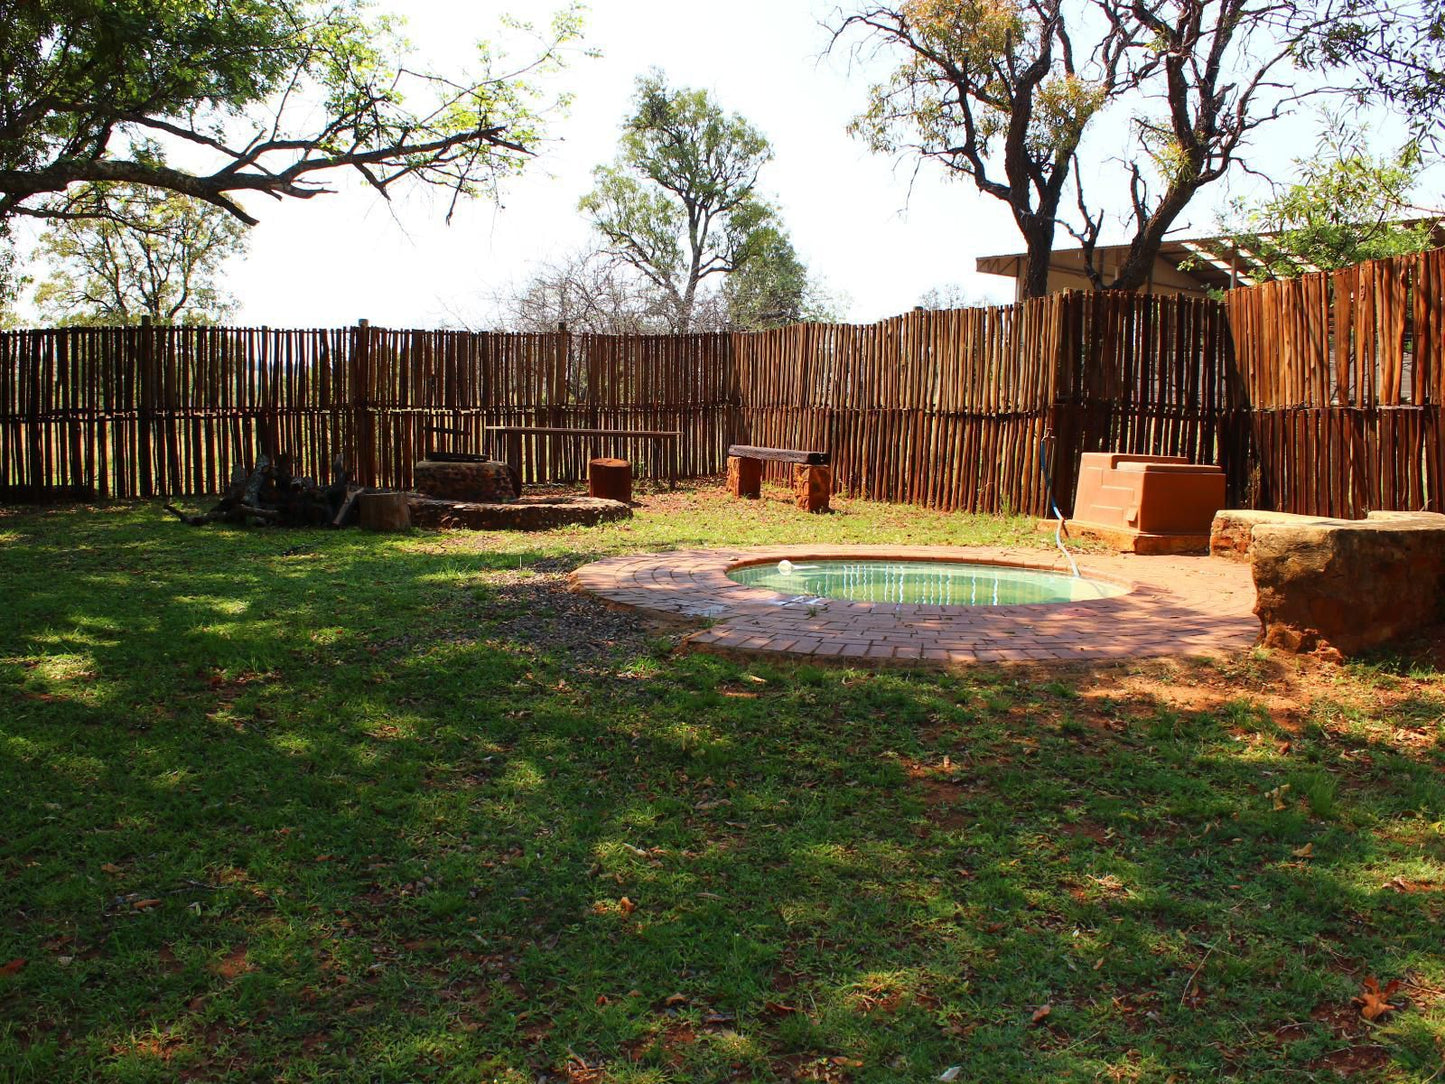 Wilgeboomsdrift Safaris Modimolle Nylstroom Limpopo Province South Africa Swimming Pool